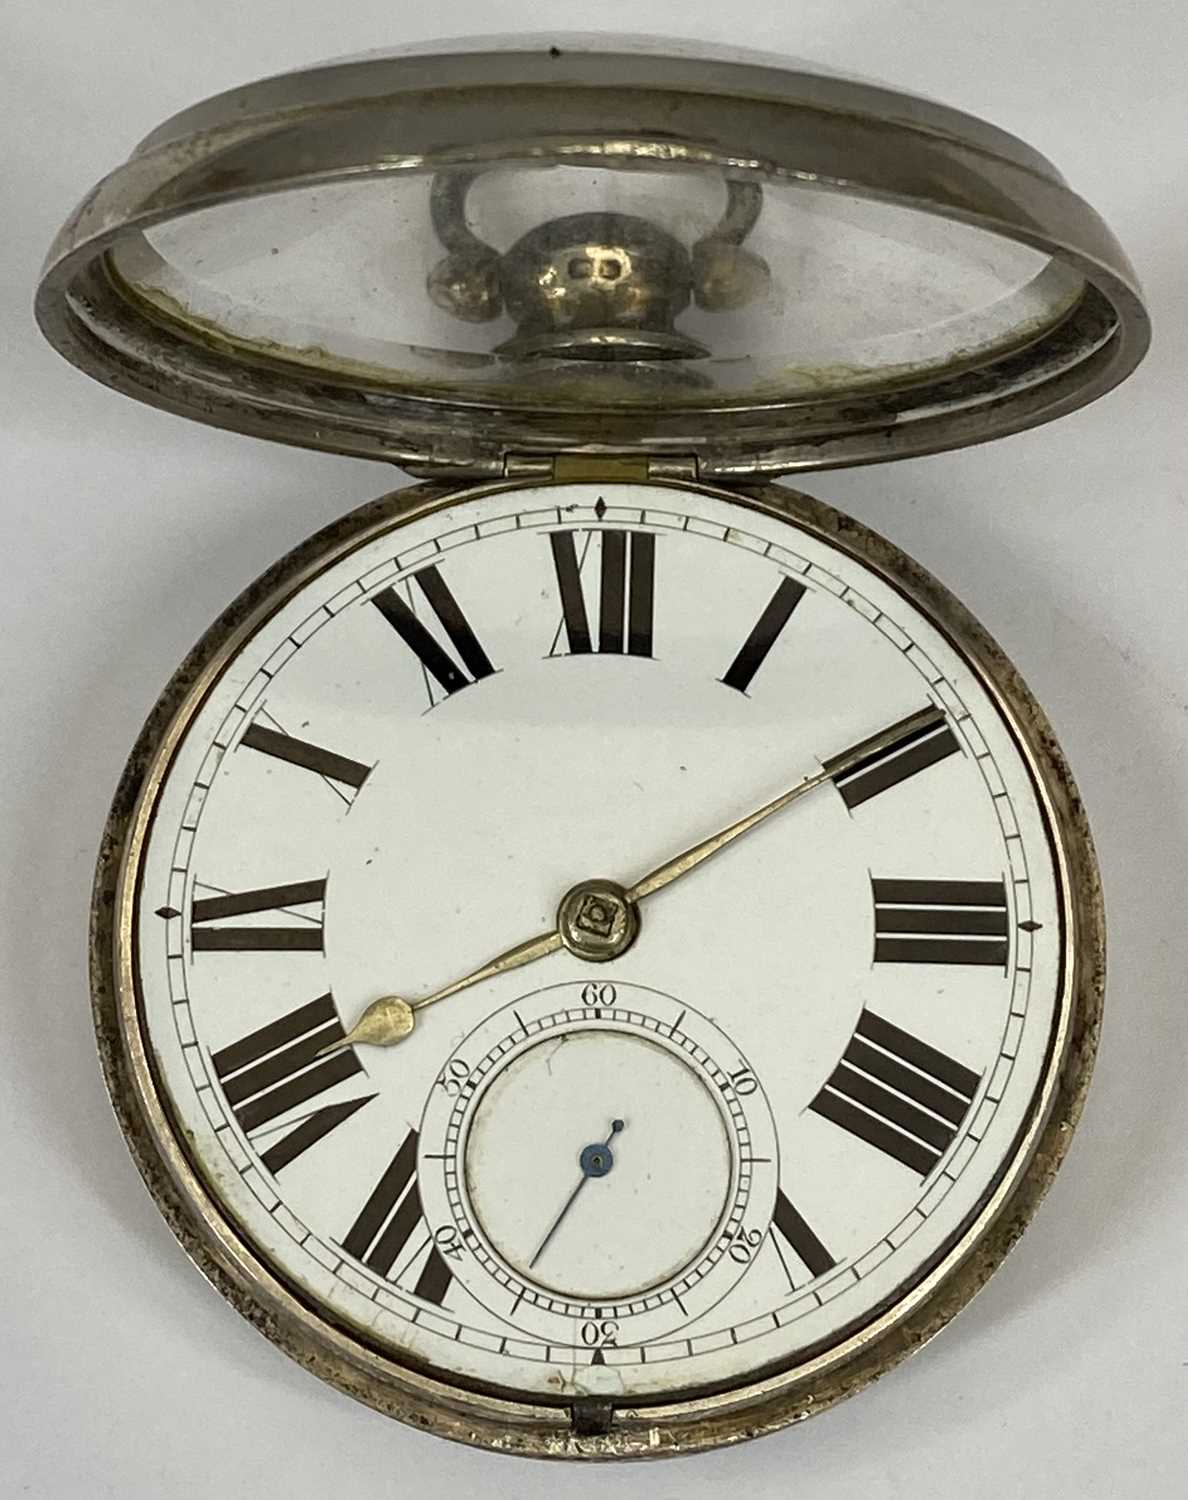 RICHARD B THOMAS, PORTHMADOG, VICTORIAN SILVER PAIR CASED VERGE POCKET WATCH, white enamel dial with - Image 3 of 3